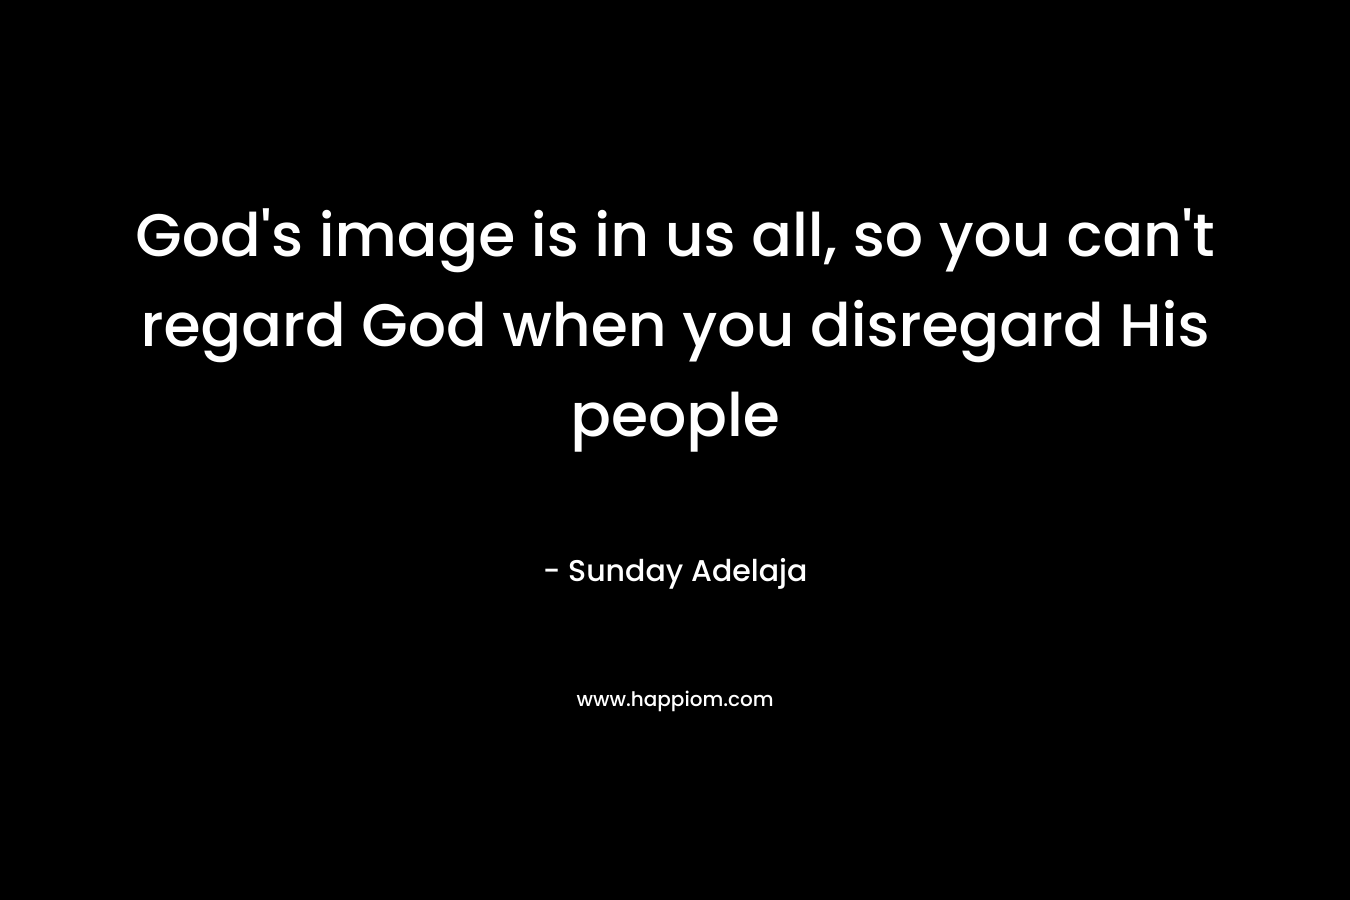 God's image is in us all, so you can't regard God when you disregard His people